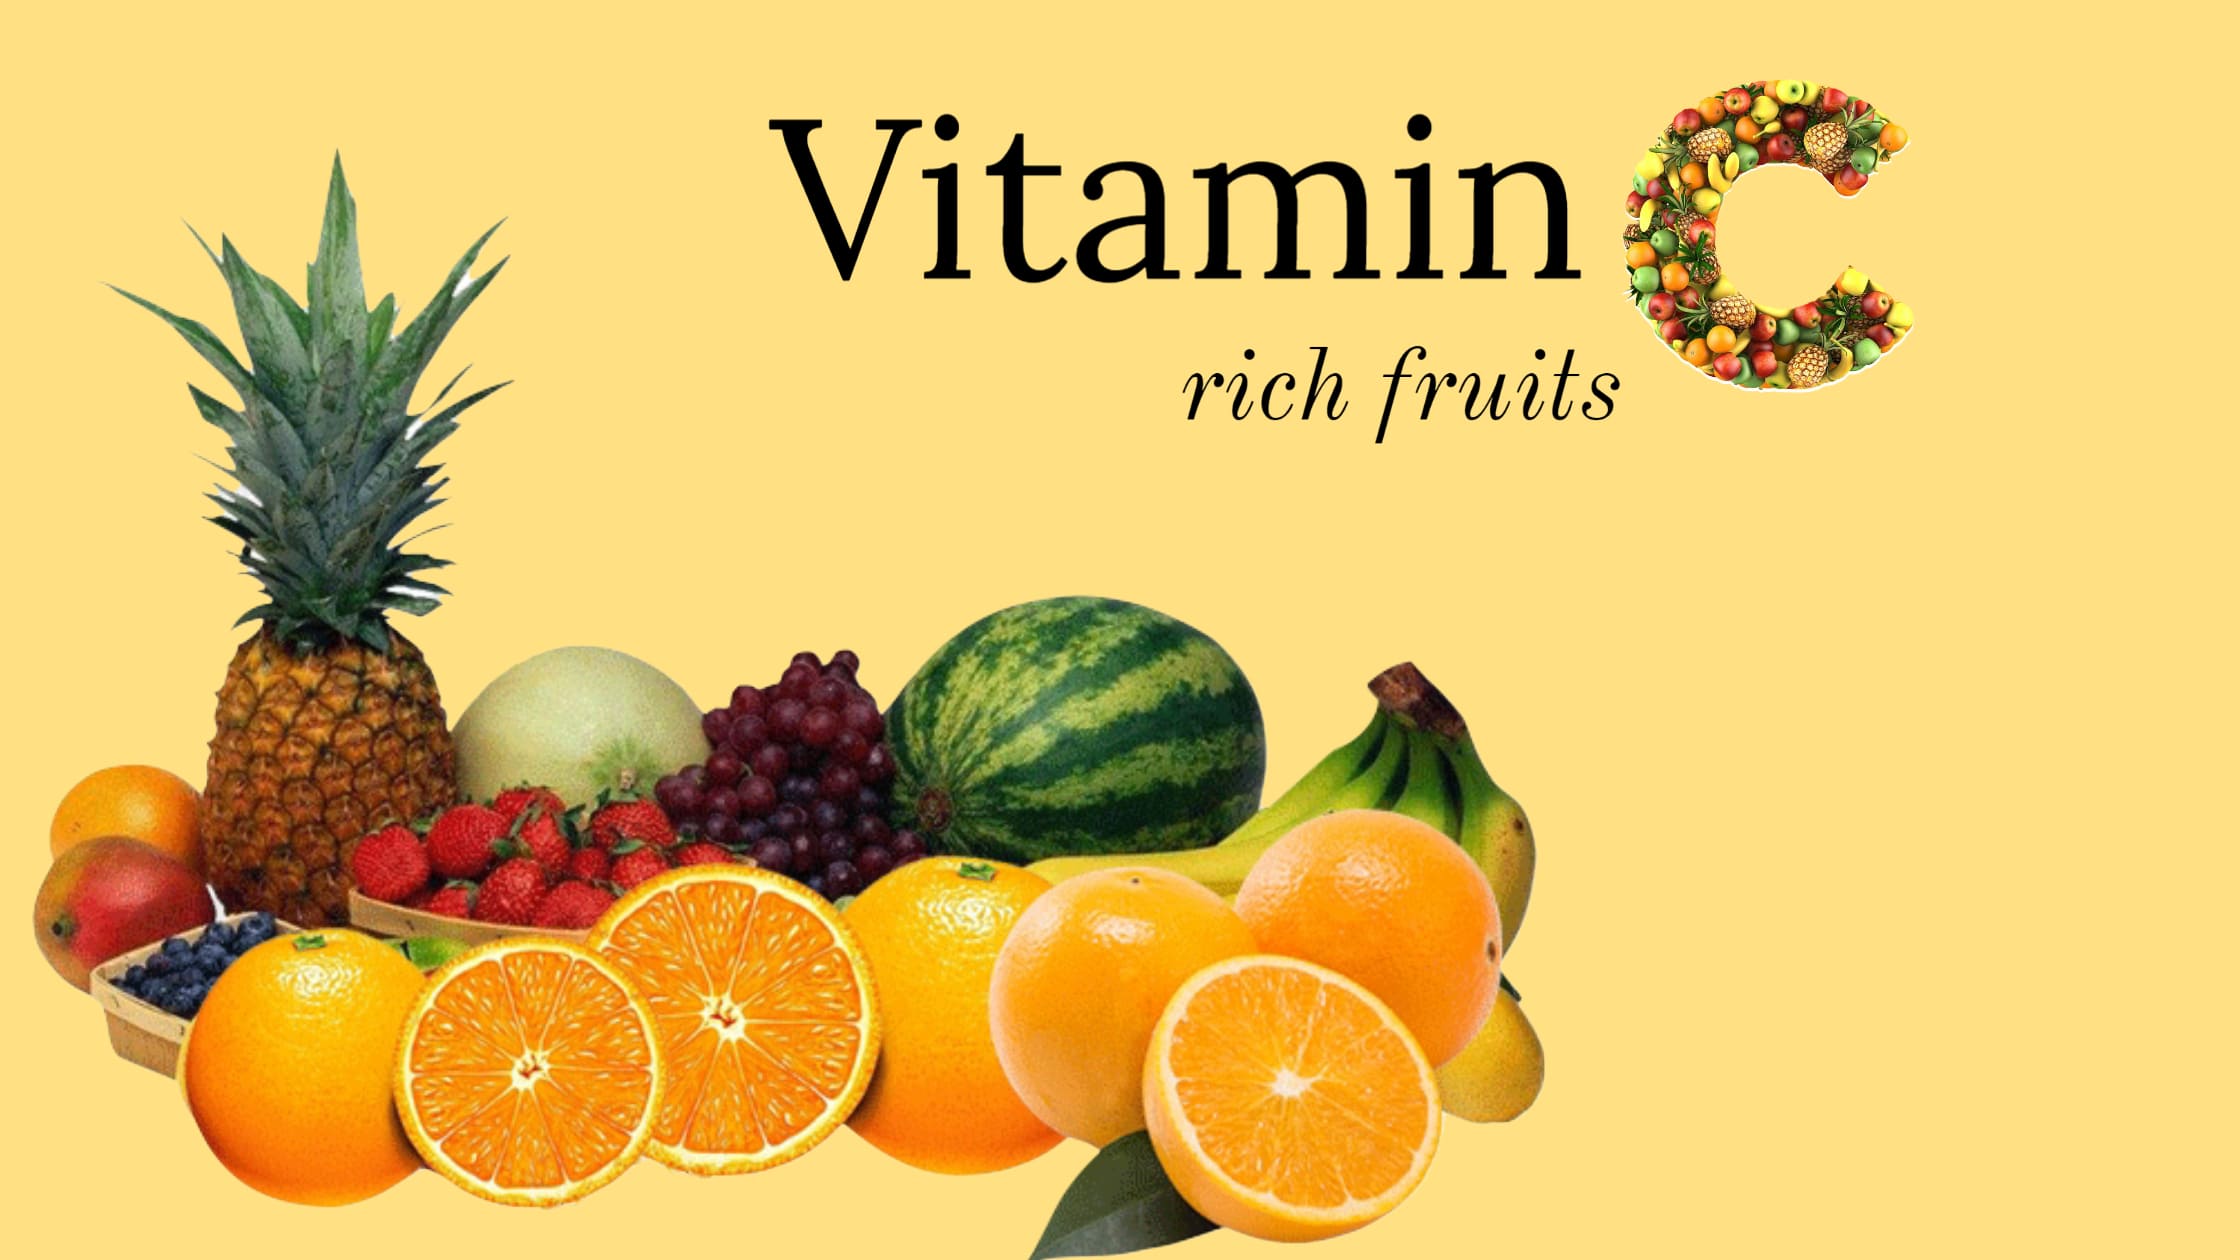 fruits-and-vegetables-rich-in-vitamin-c-list-and-health-benefits-vims